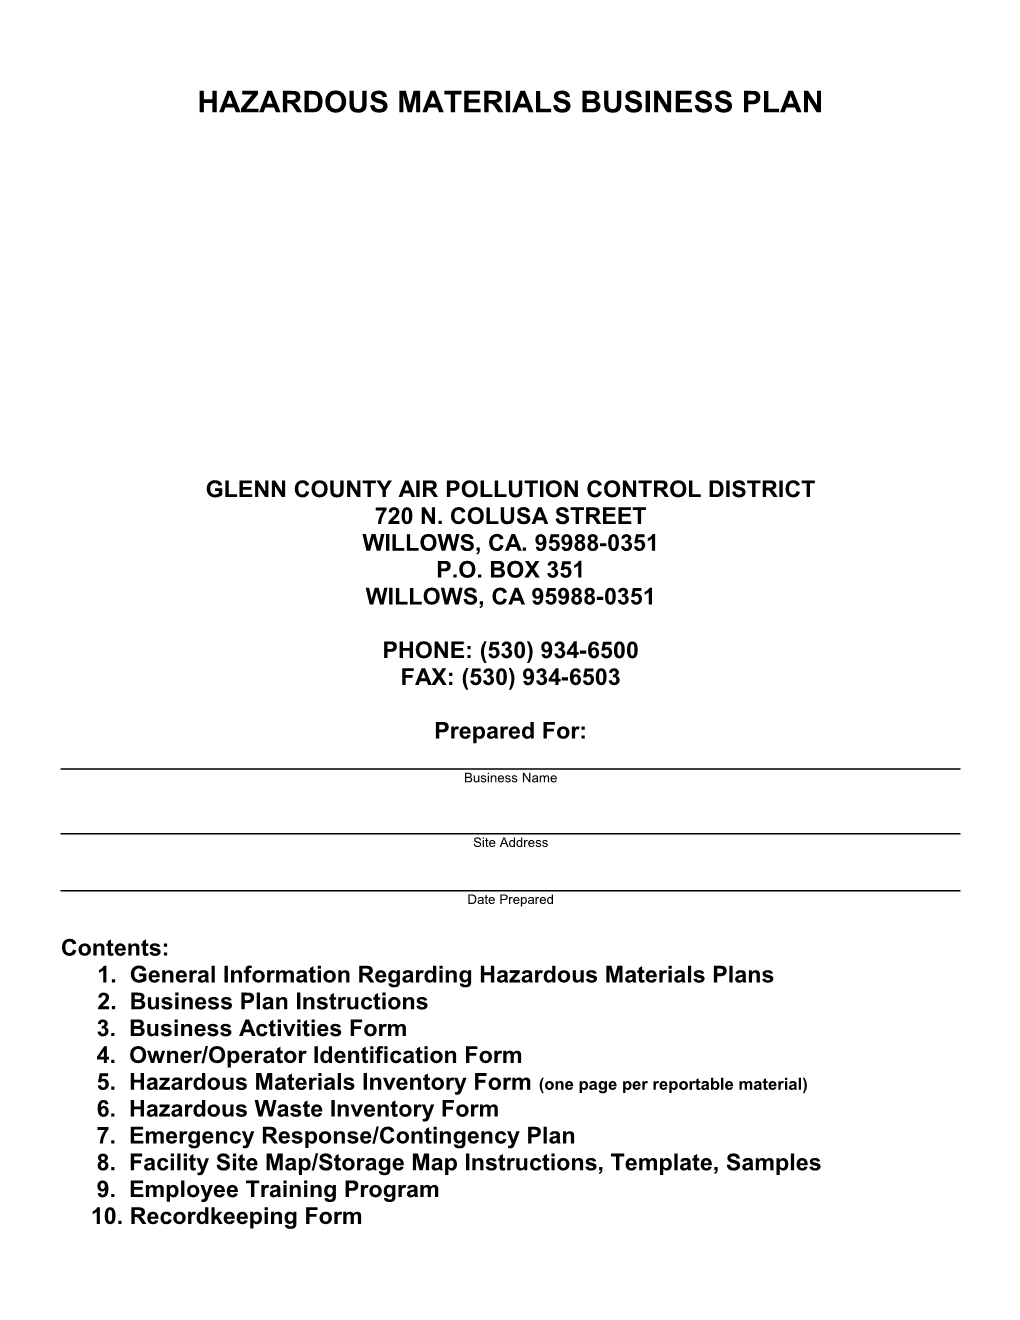 County of Glenn Air Pollution Control District